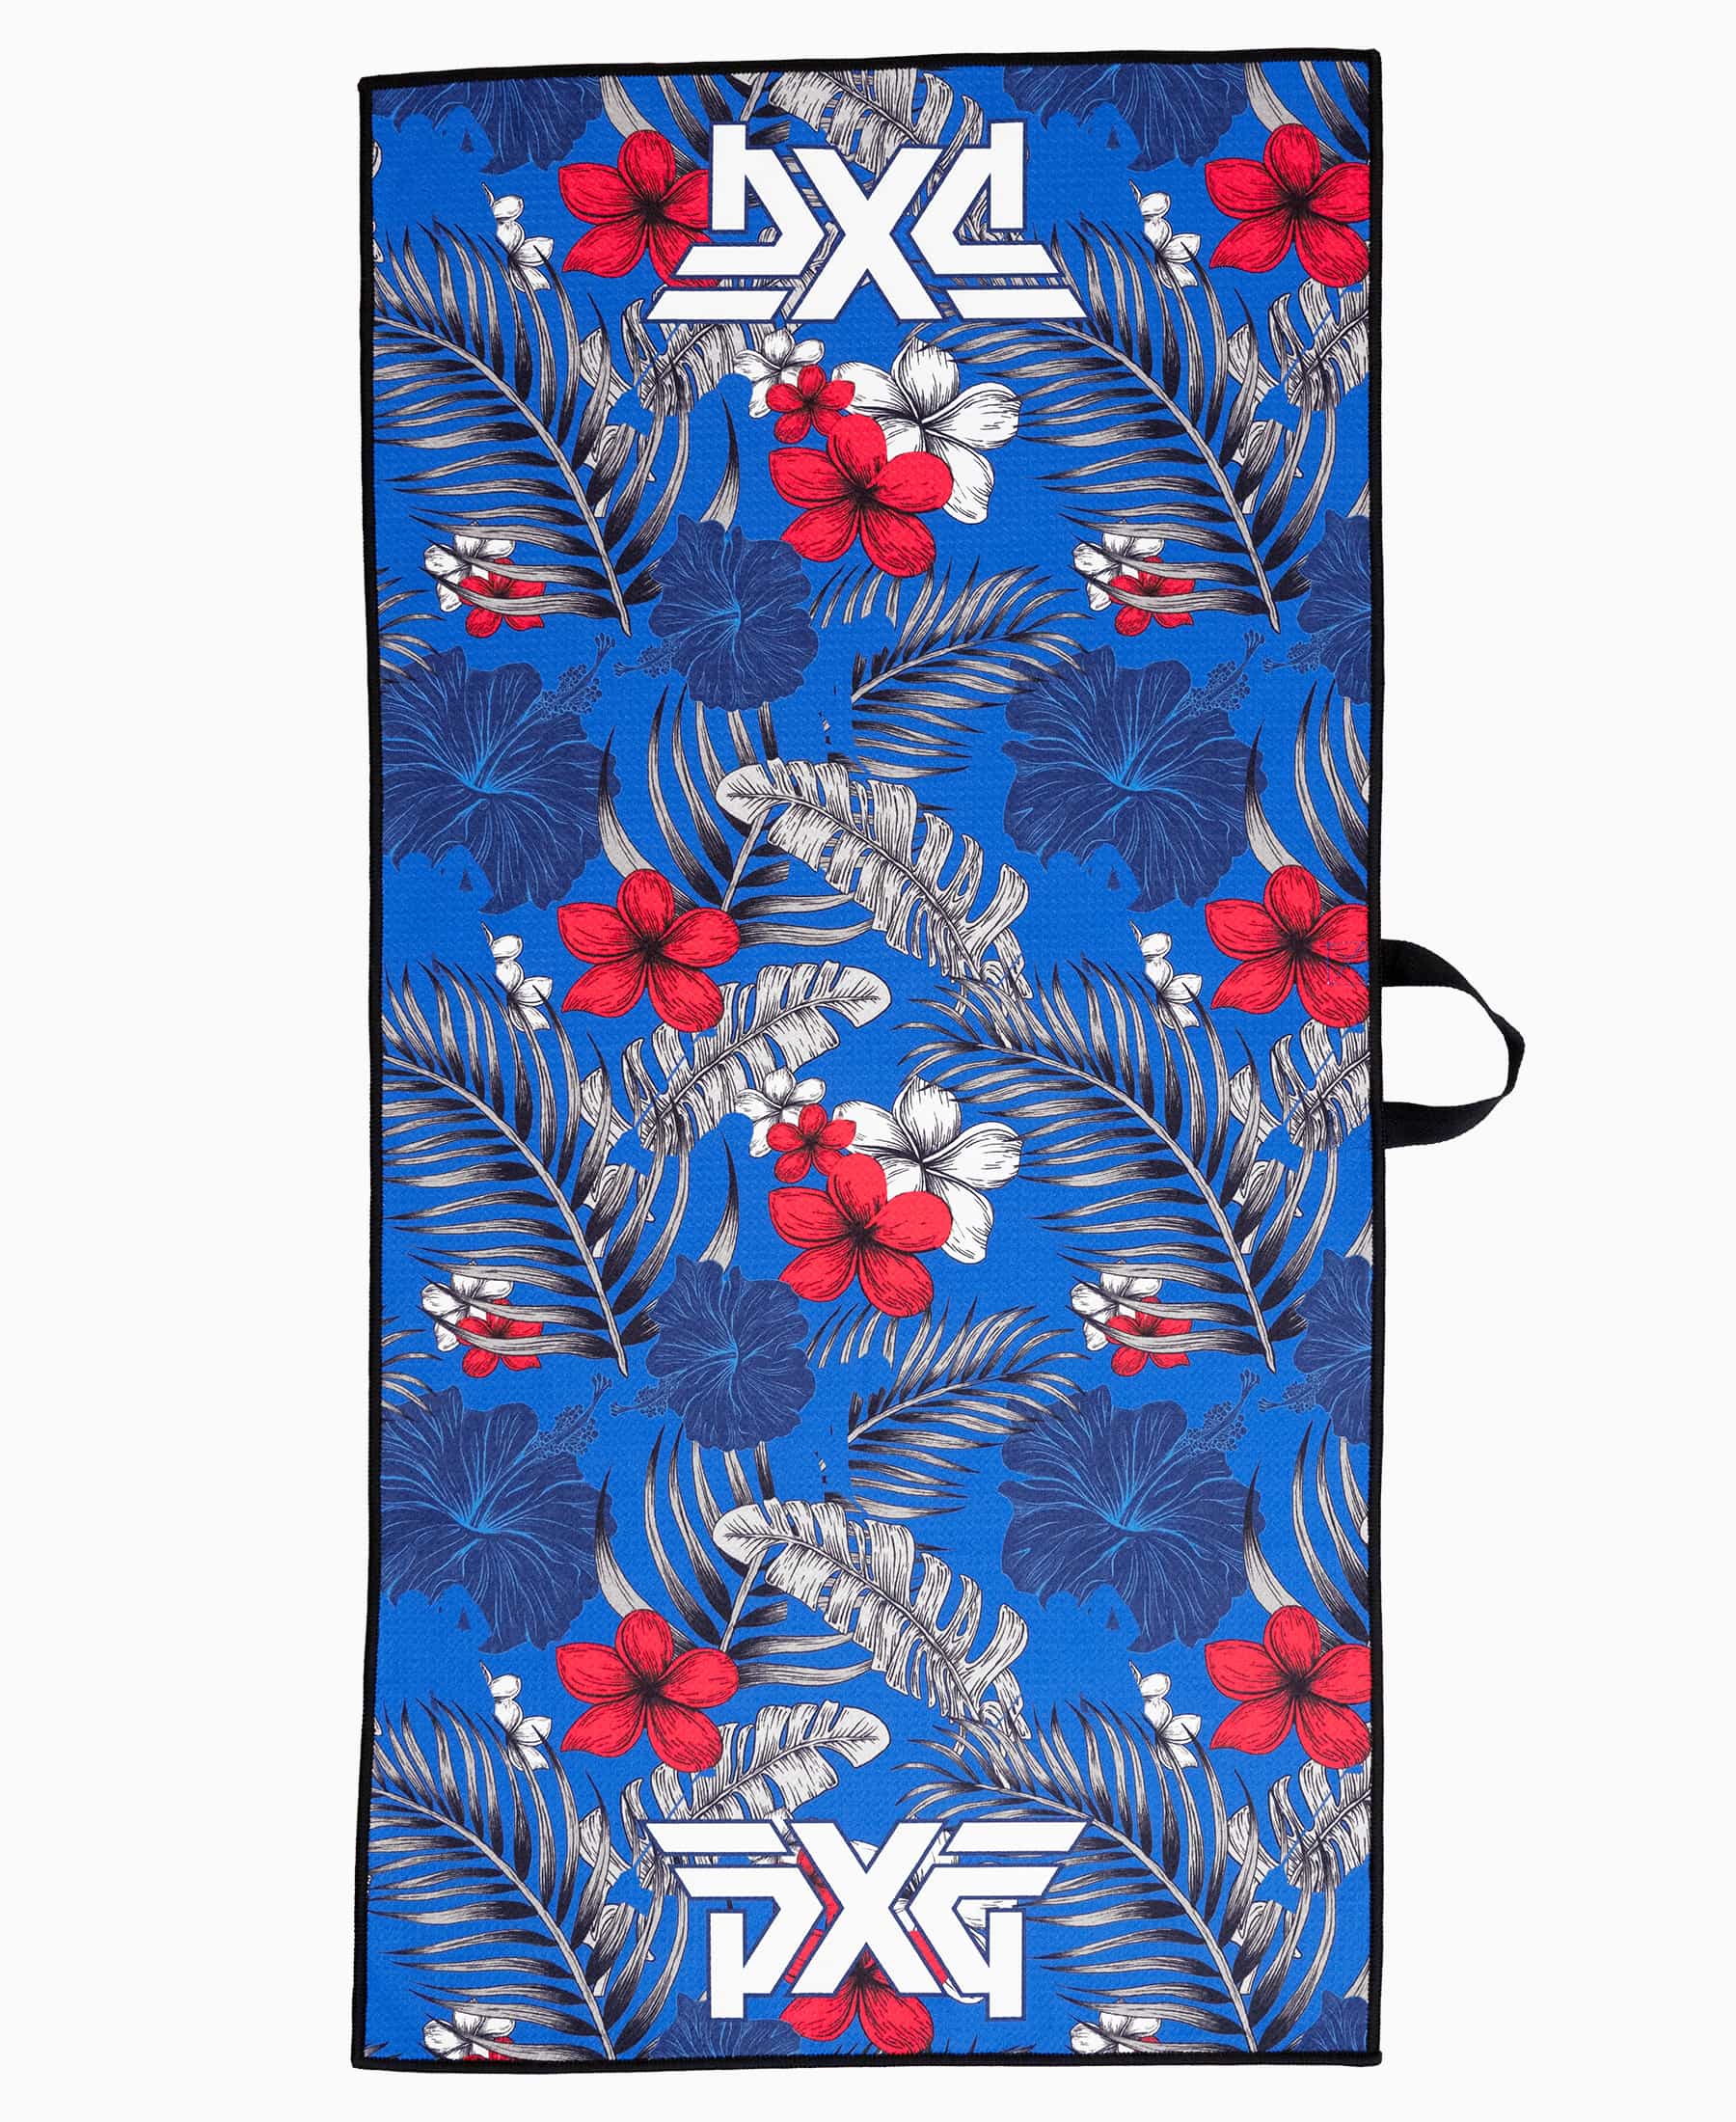 https://www.pxg.com/on/demandware.static/-/Sites-pxg-master/default/dwfcd84a0a/images/hi-res/accessories/on%20the%20course/towels/Aloha%2024%20Players%20Towel/Aloha-24-Players-Towel-PDP-Listing-1-HiRes-50.jpg